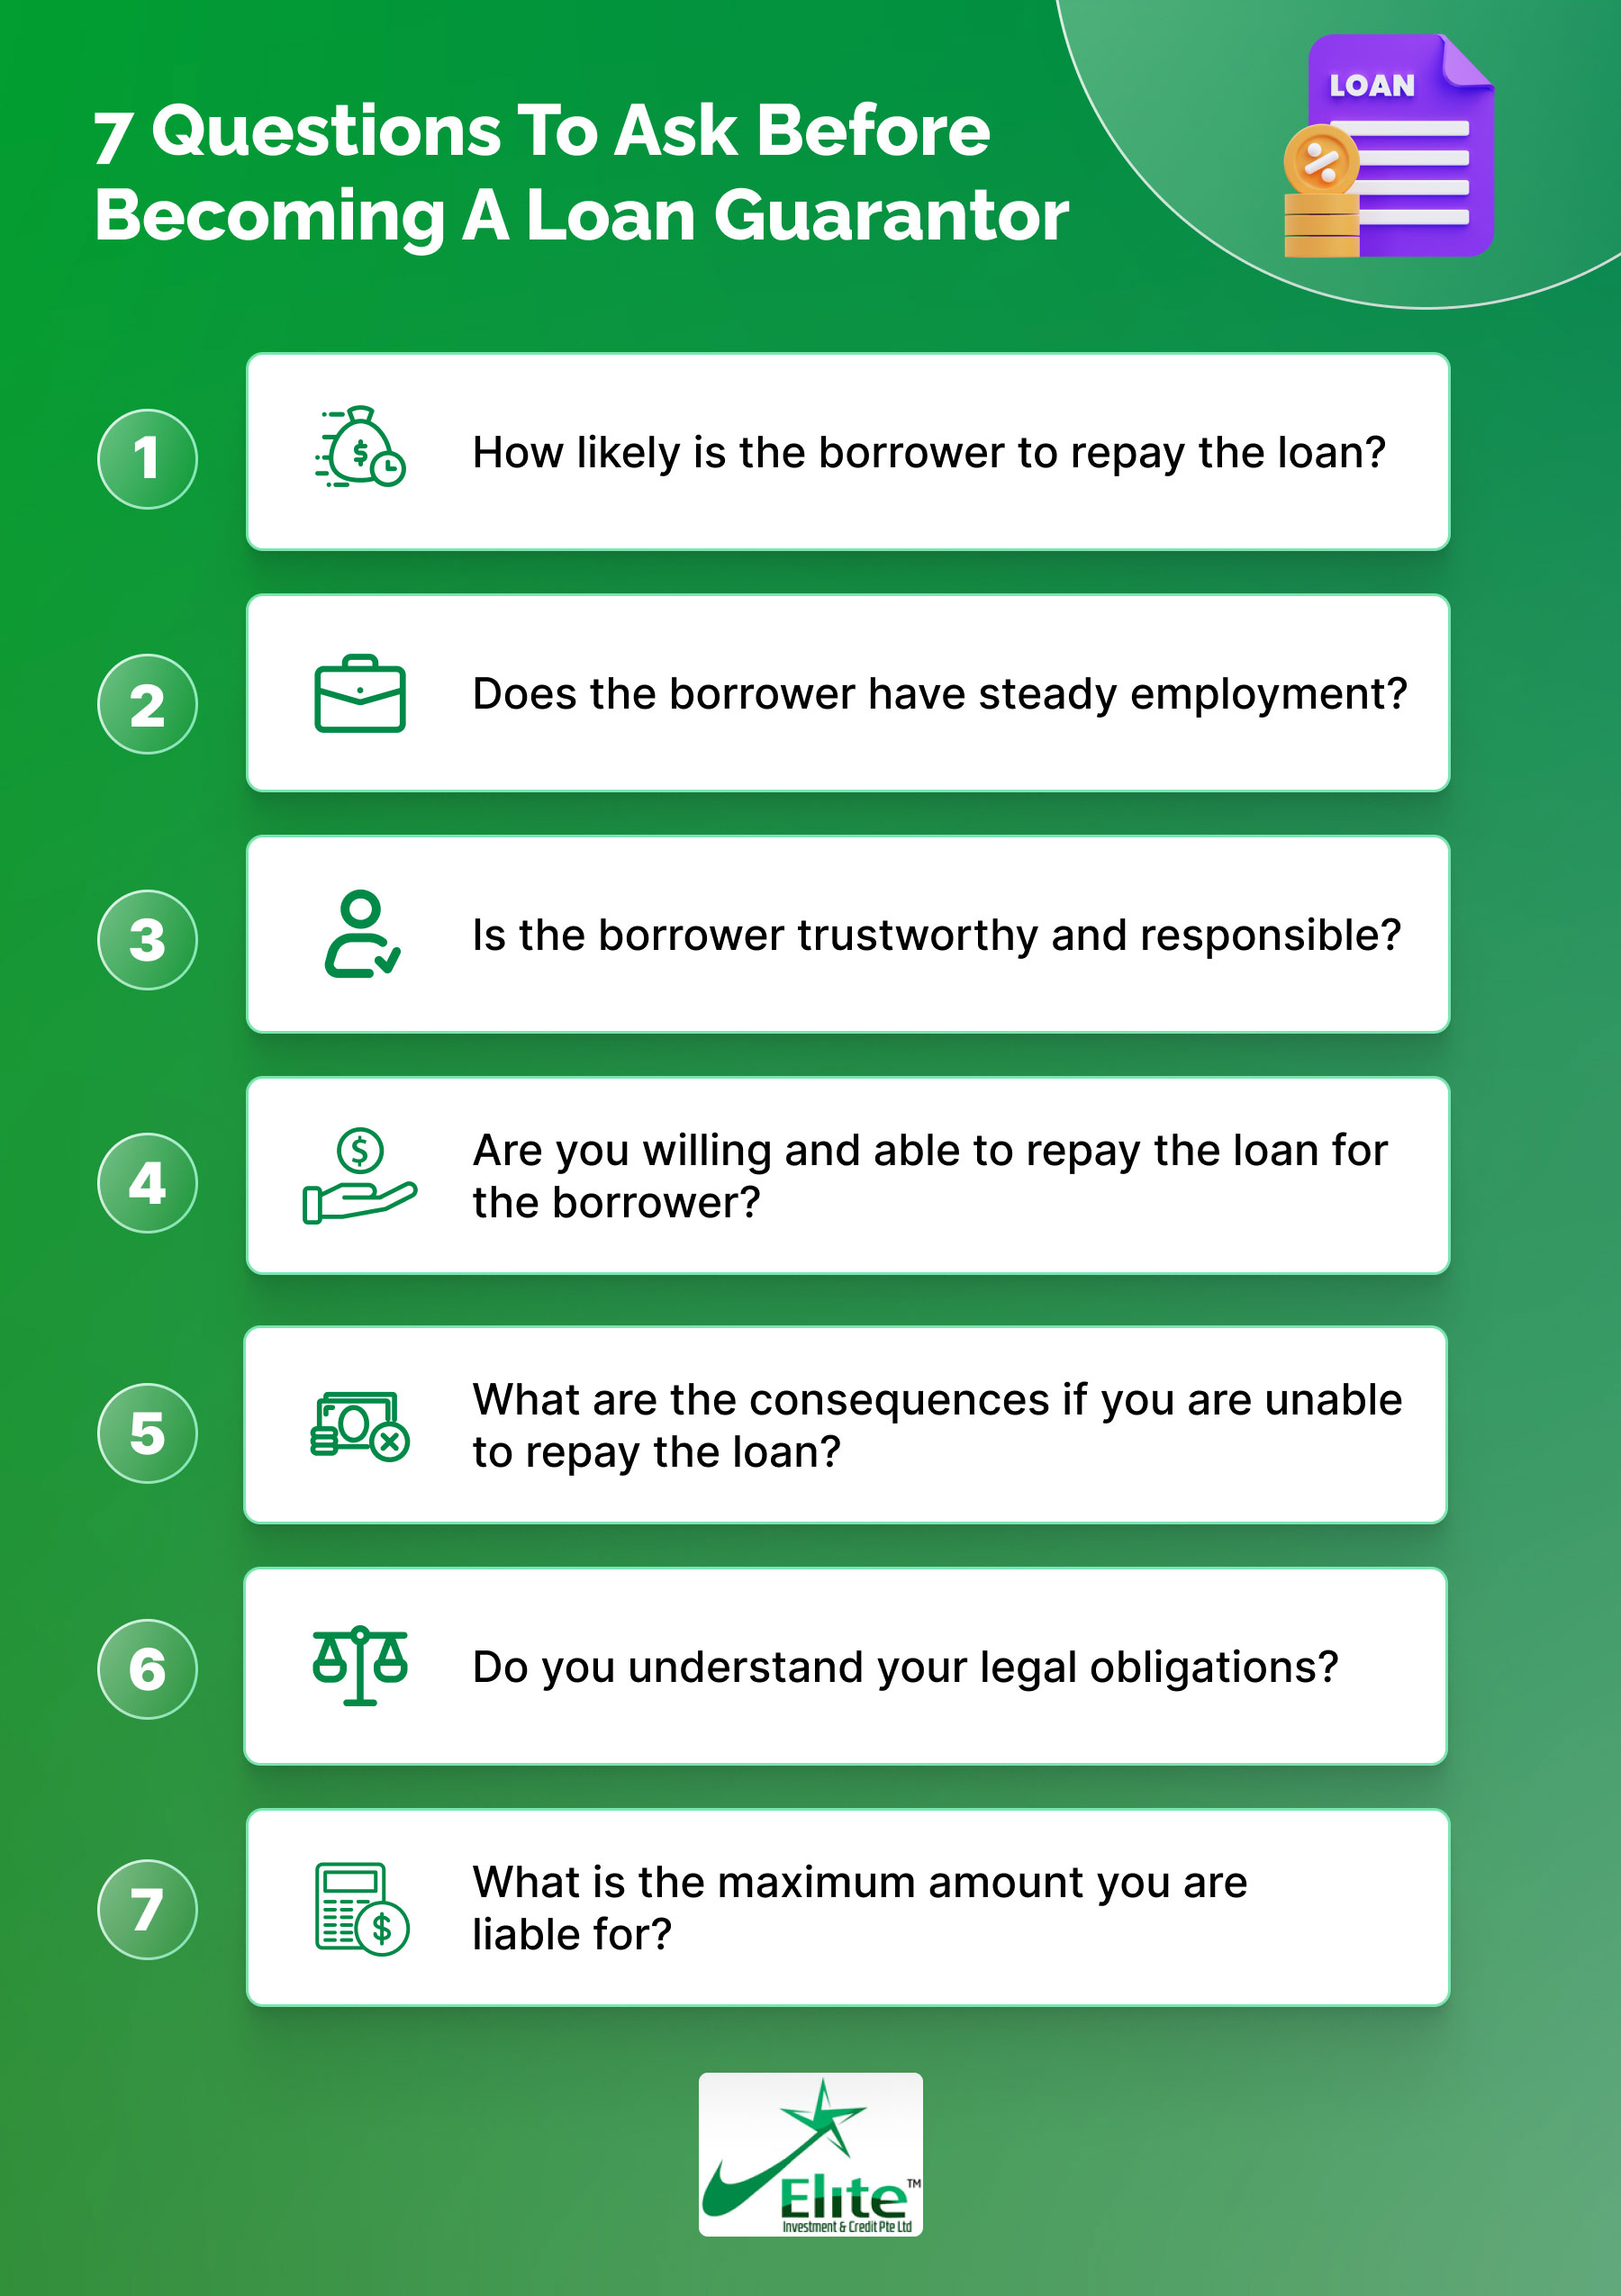 7 questions to ask before becoming a loan guarantor